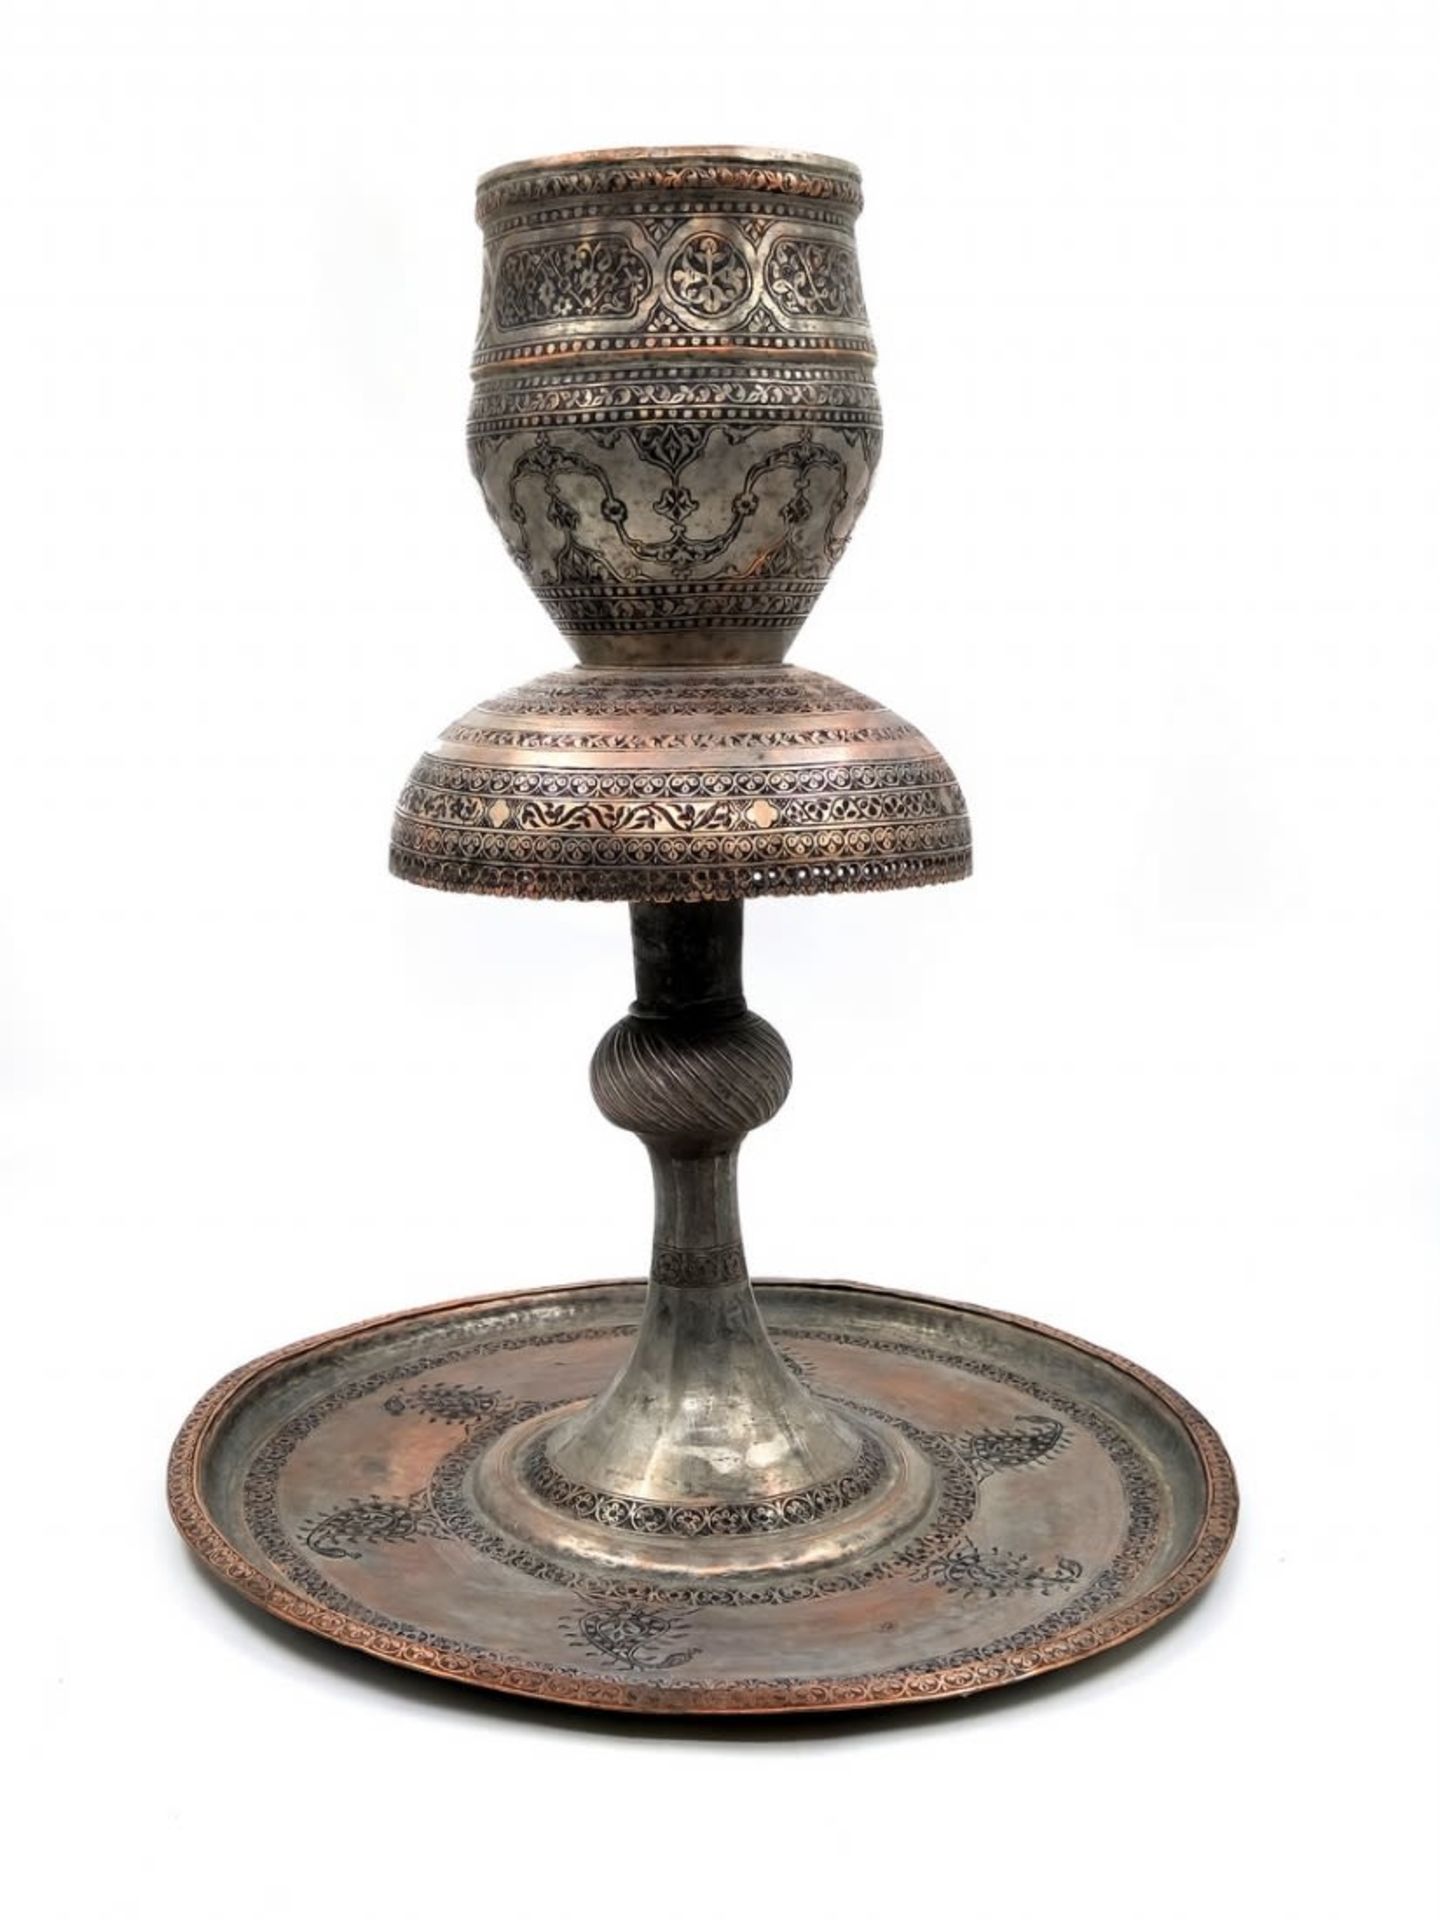 A large and high-quality antique Persian mosque lamp, Qajar dynasty period, (Qajar dynasty) 1794-